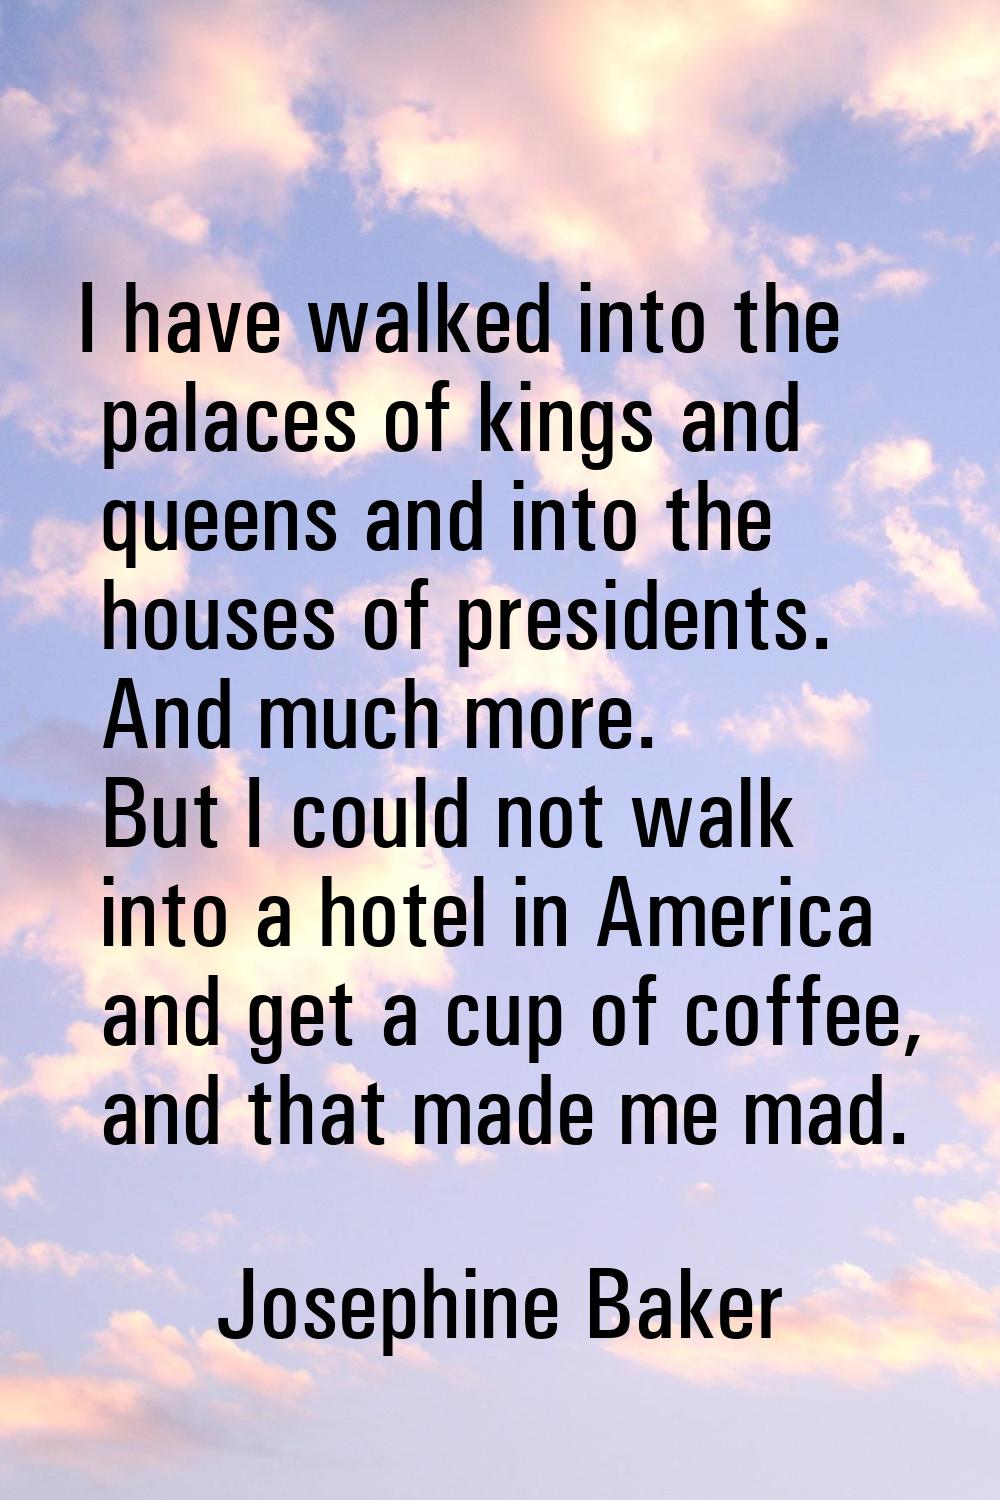 I have walked into the palaces of kings and queens and into the houses of presidents. And much more